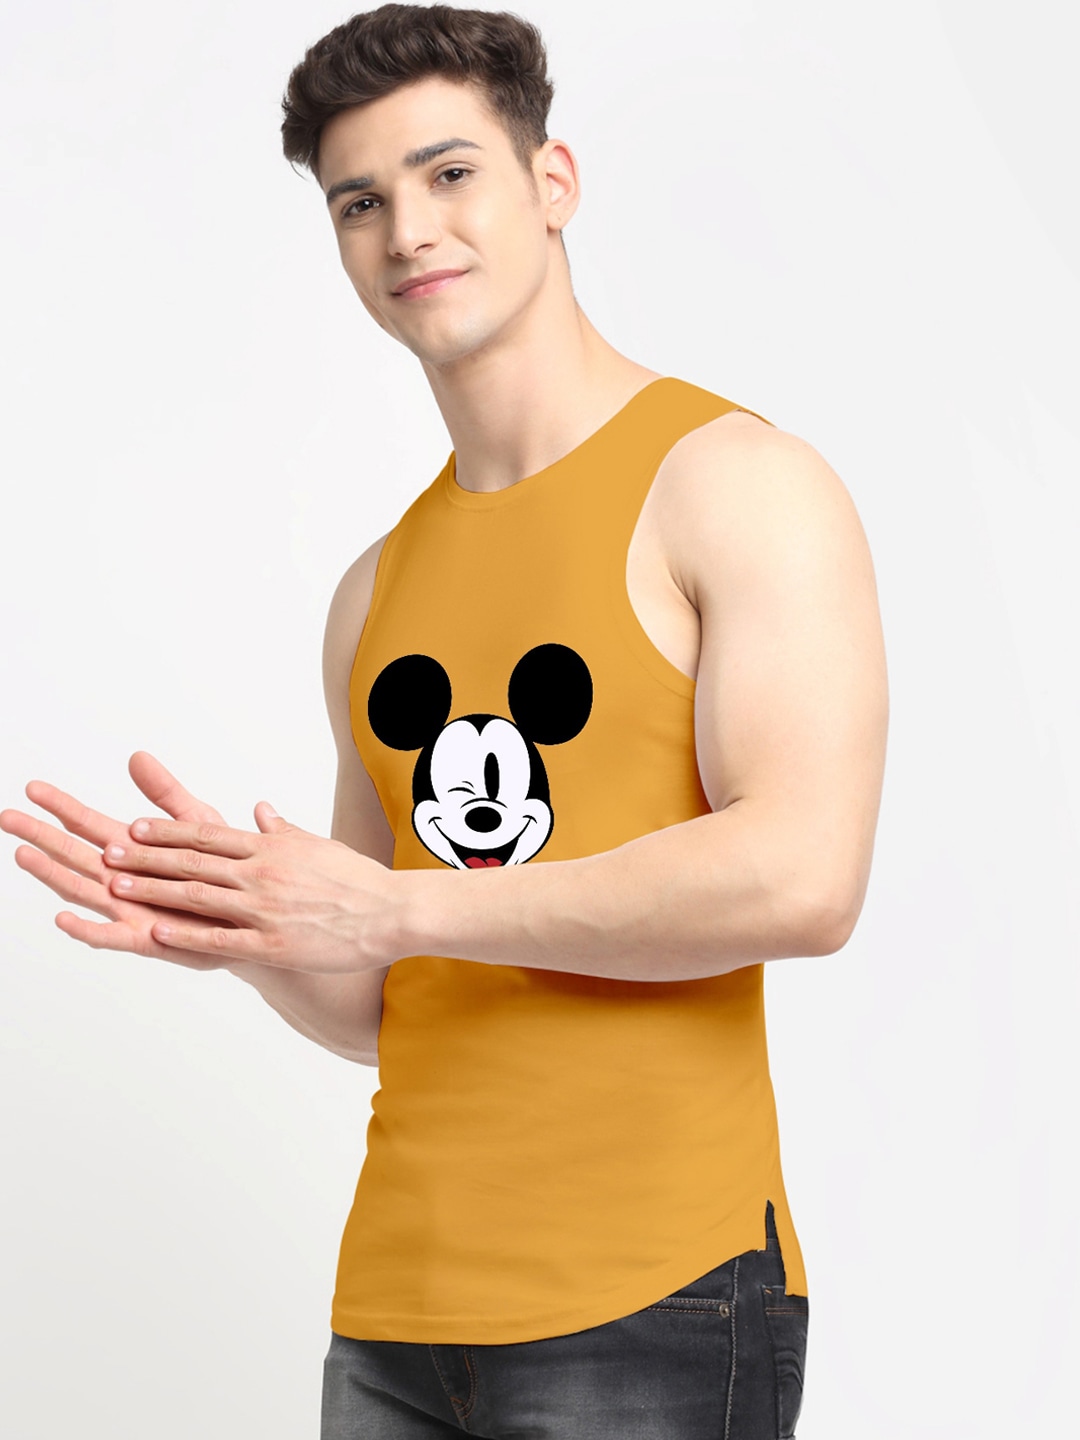 Clothing Innerwear Vests | Friskers Men Gold-Toned Printed Pure Cotton Innerwear Vests - XU53945